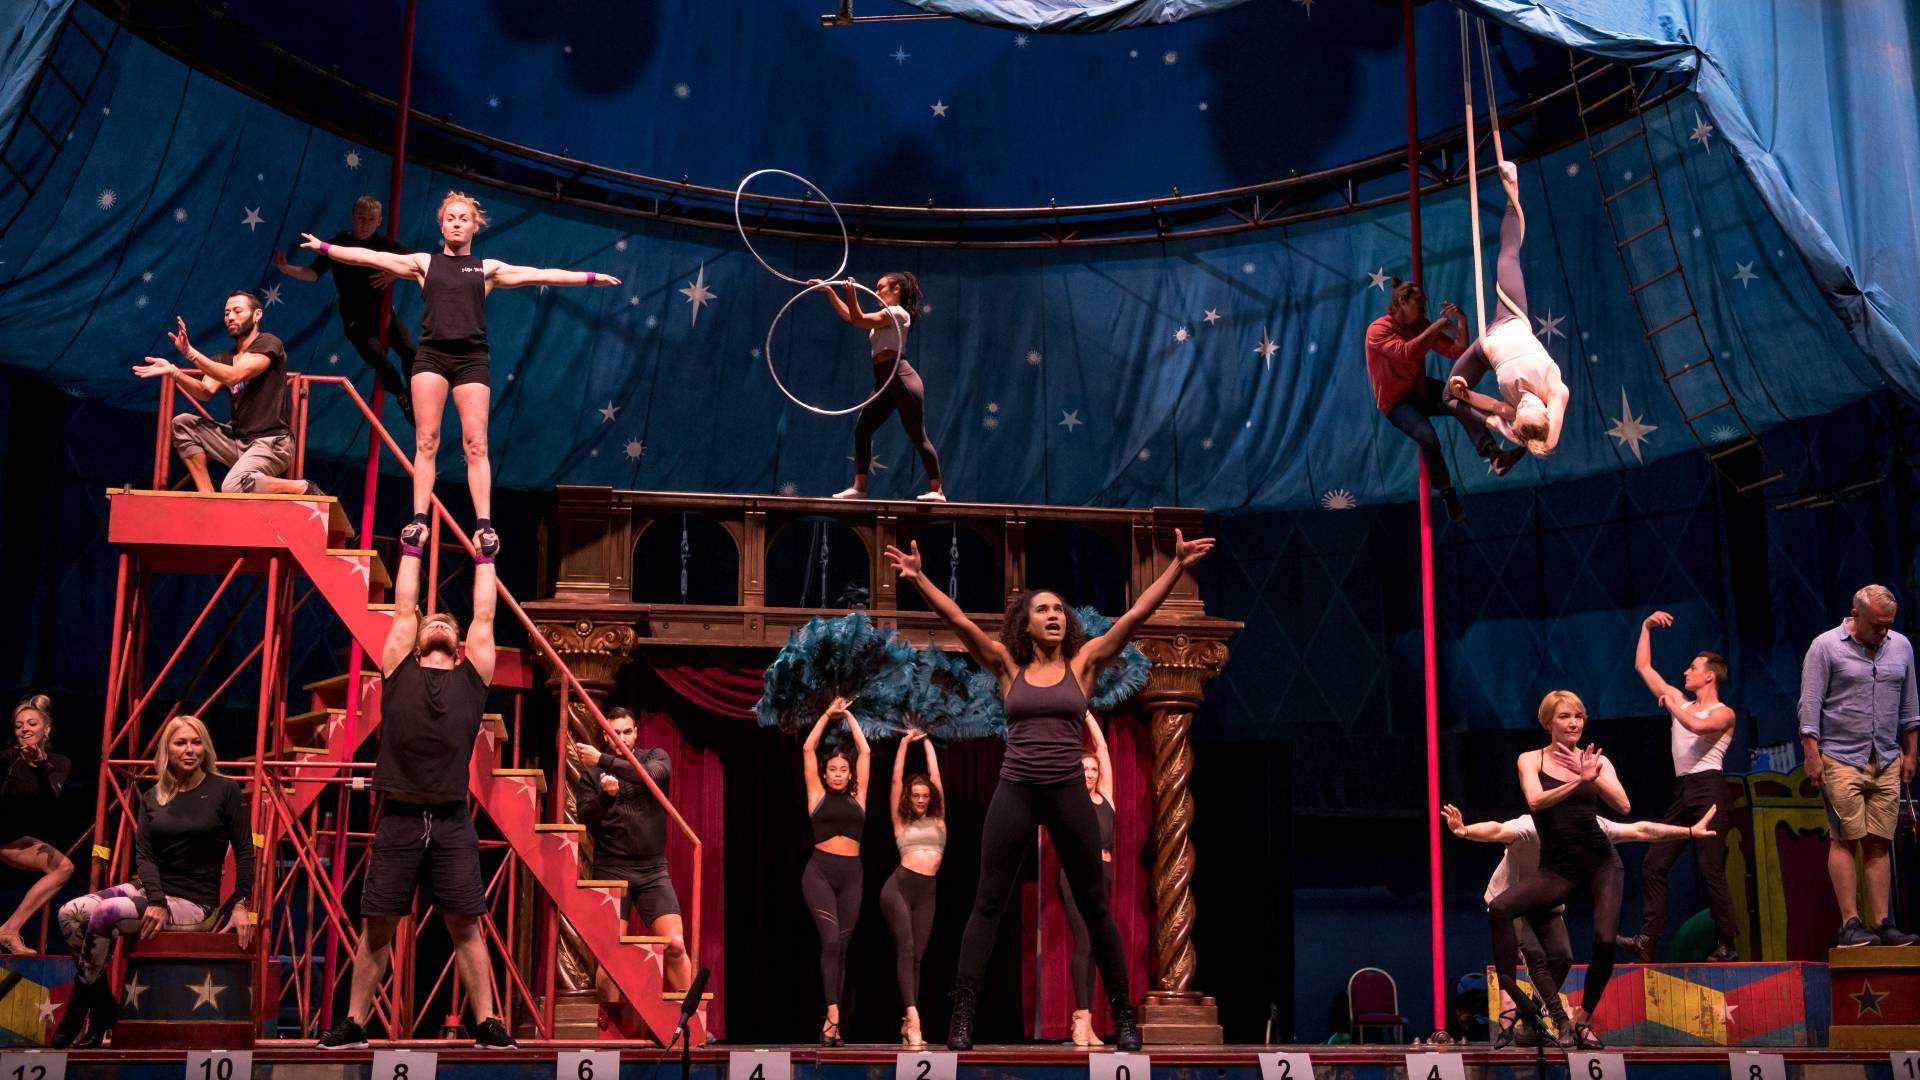 What Makes Sydney's 'Pippin The Musical' Truly Unique, According to Its Circus Coordinator